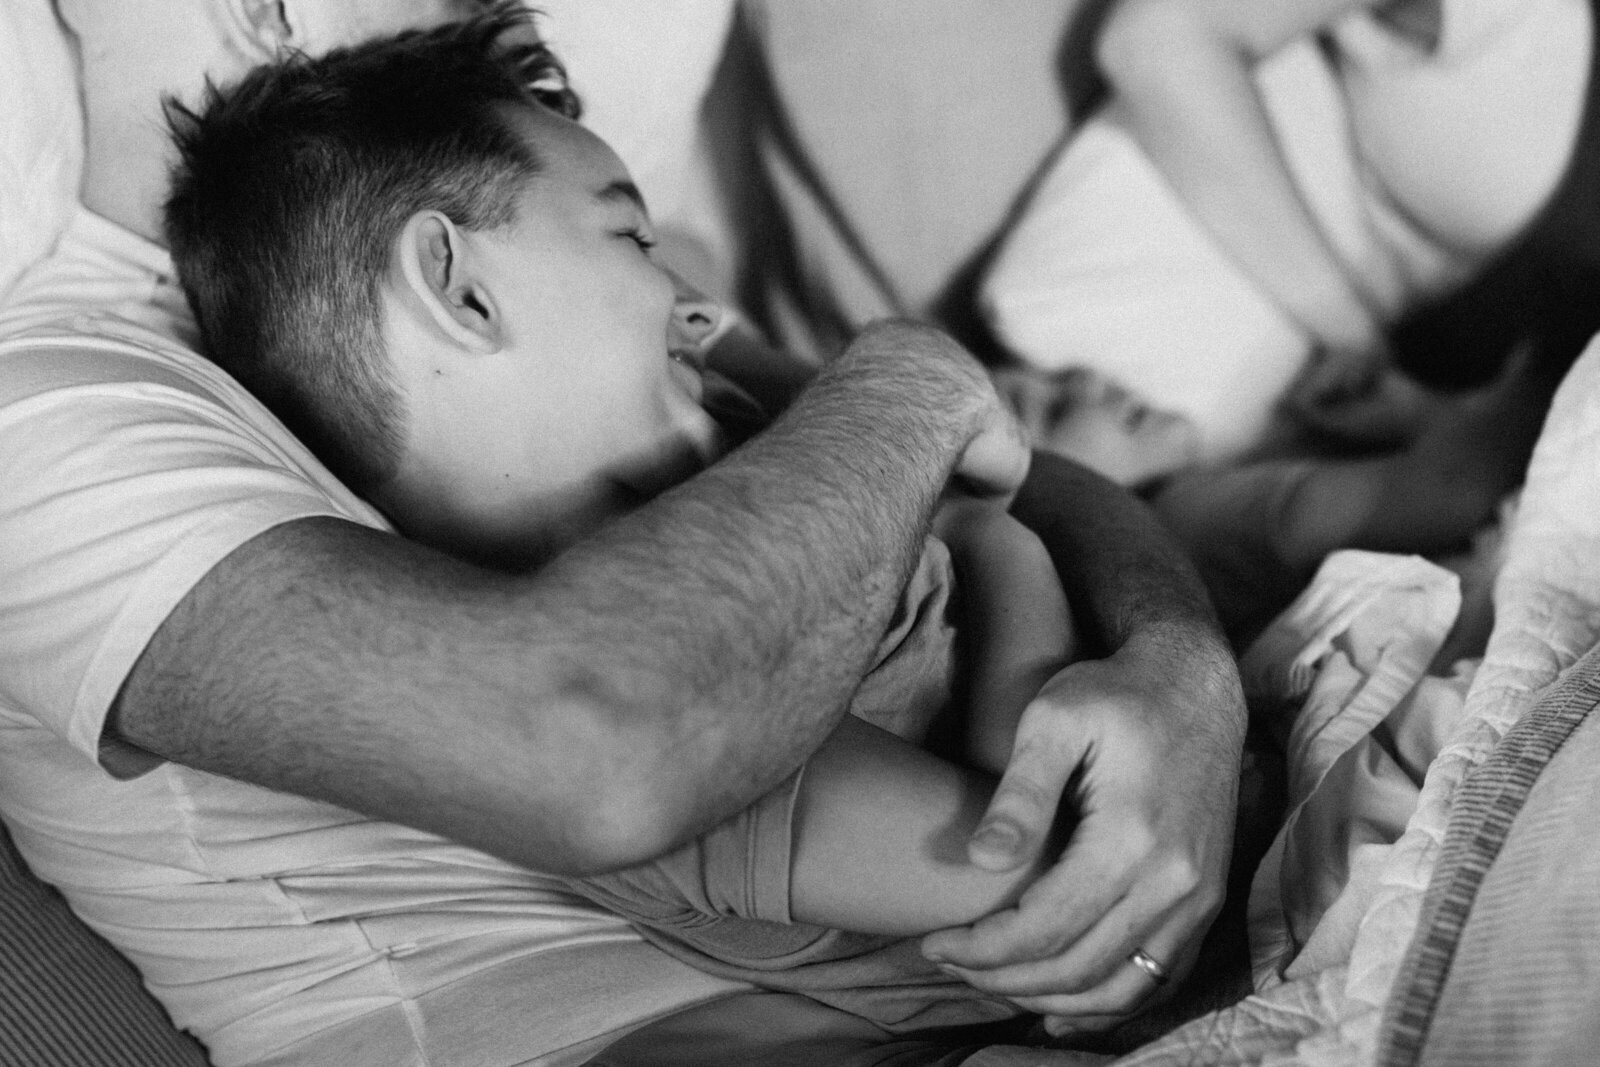 A little boy lays against his dad's chest while dad's arms wrap tightly around him